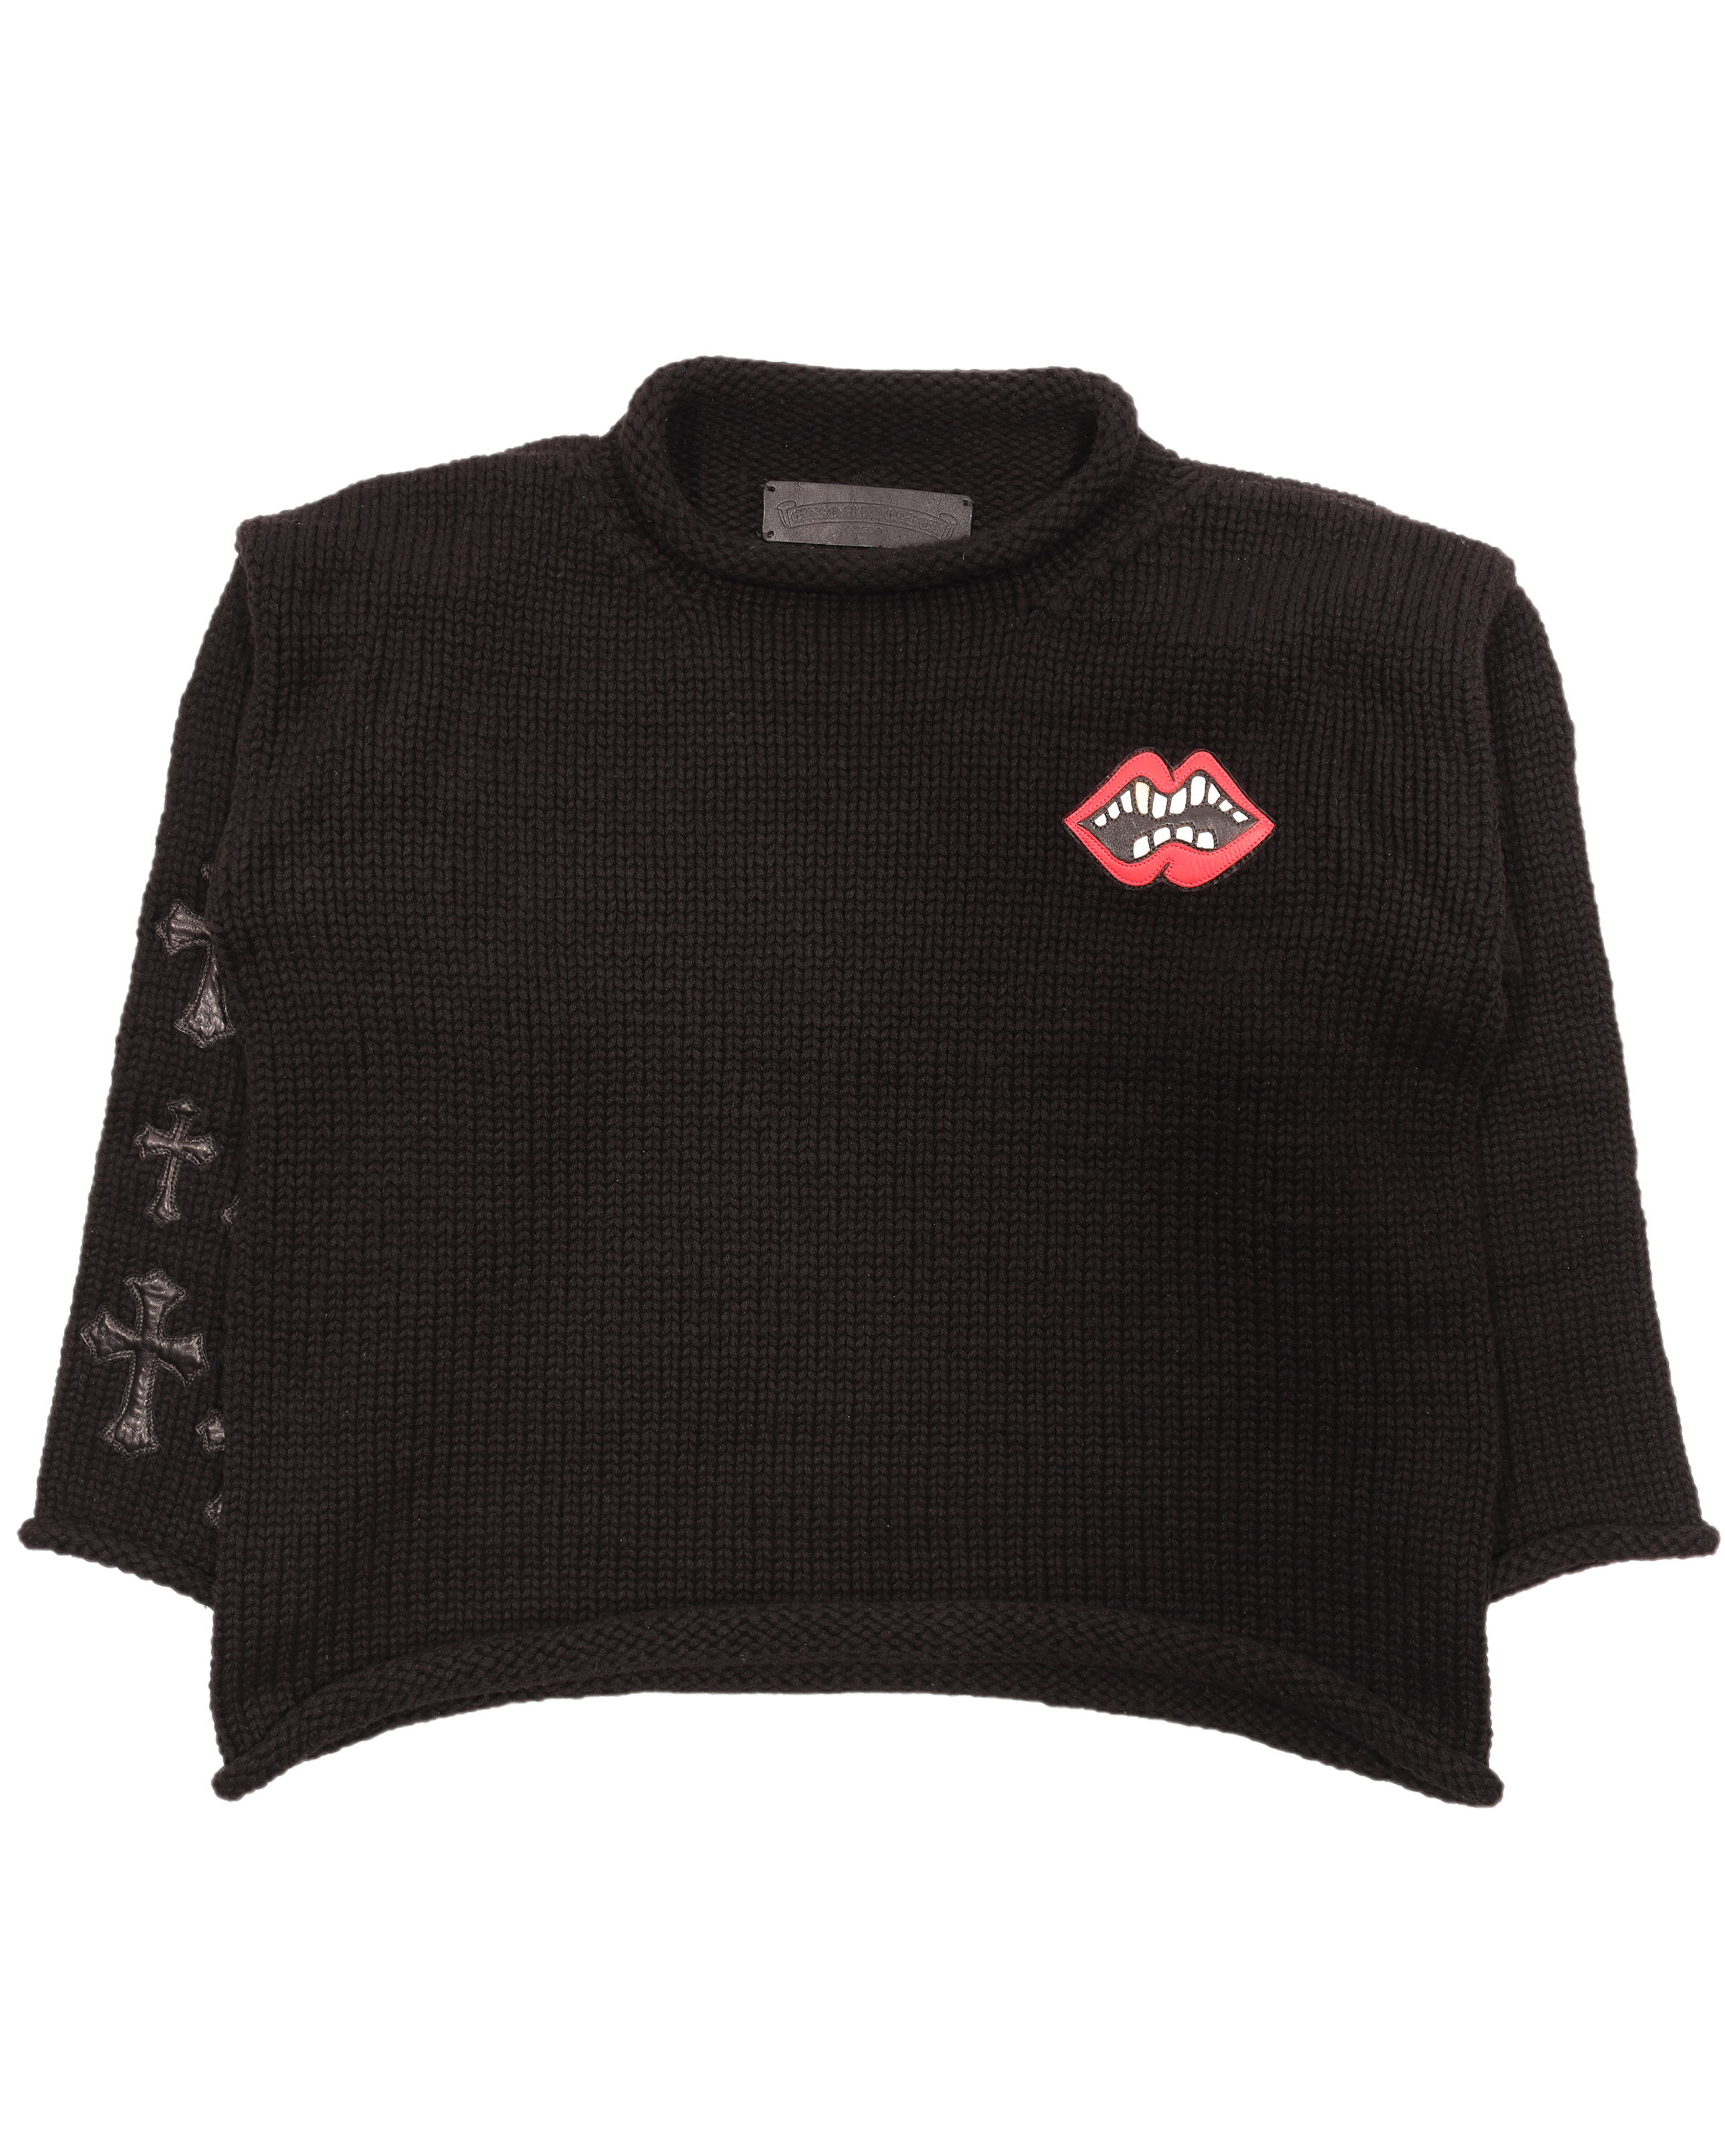 Handknitted Cashmere Crewneck Leather Embellished Sweater